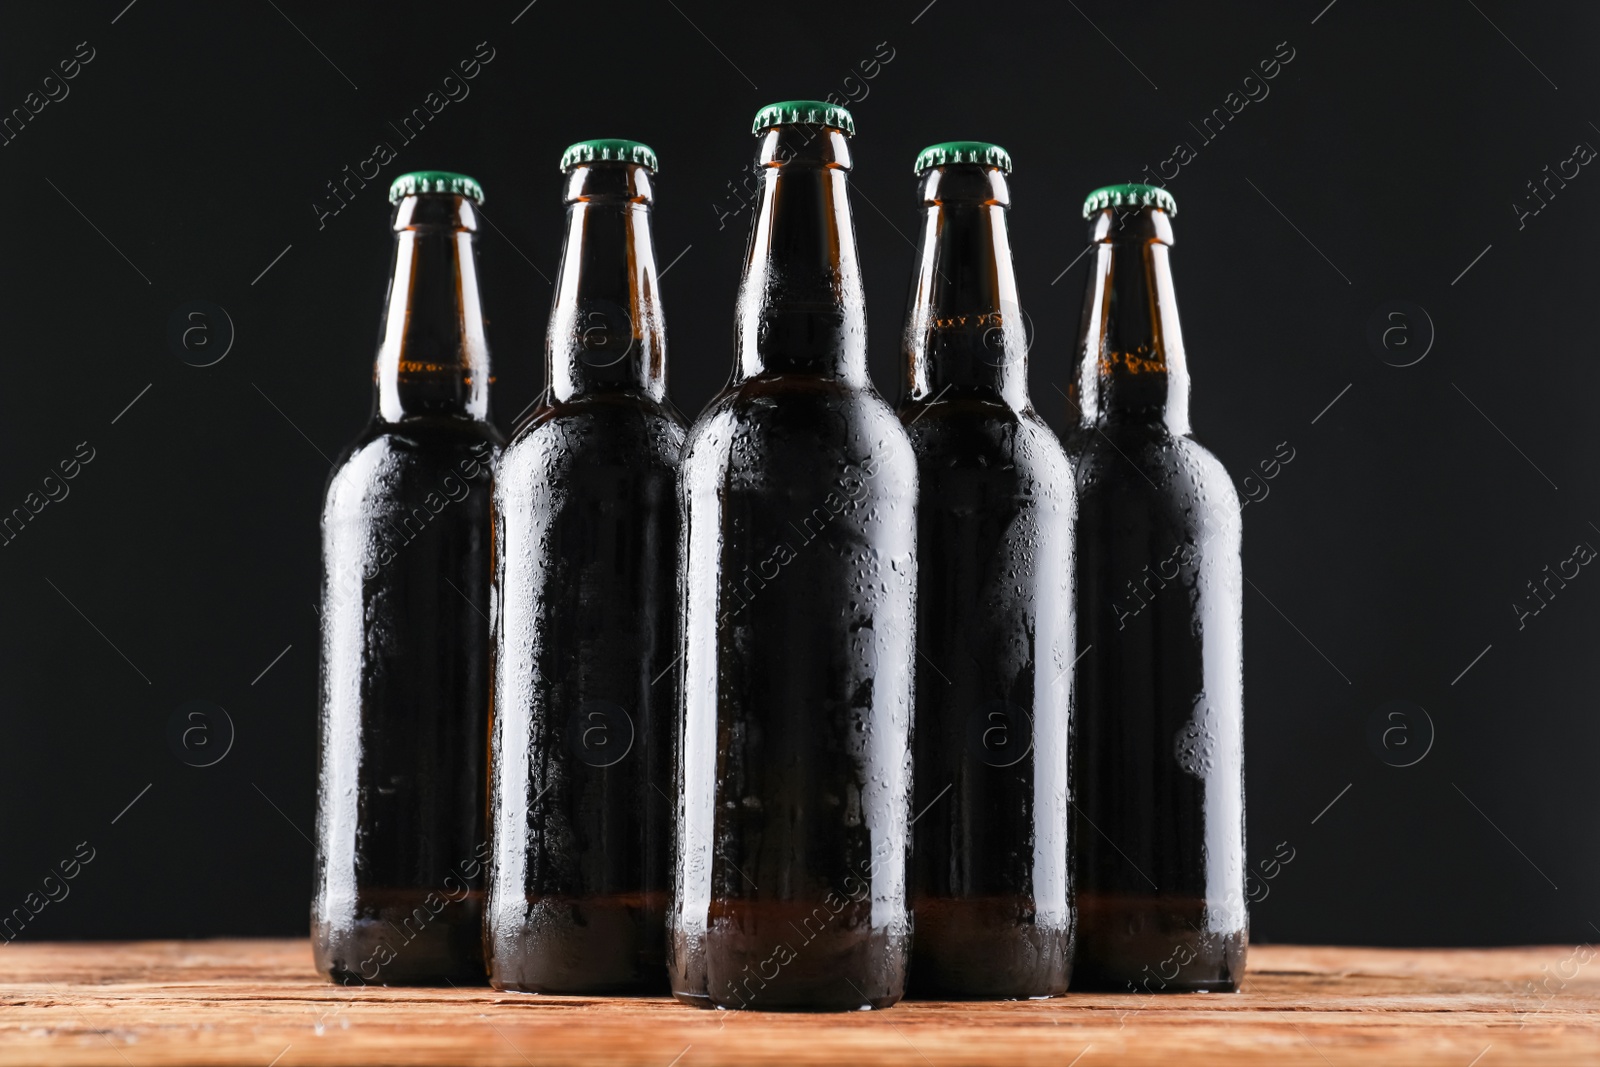 Photo of Many bottles of beer on wooden table against dark background